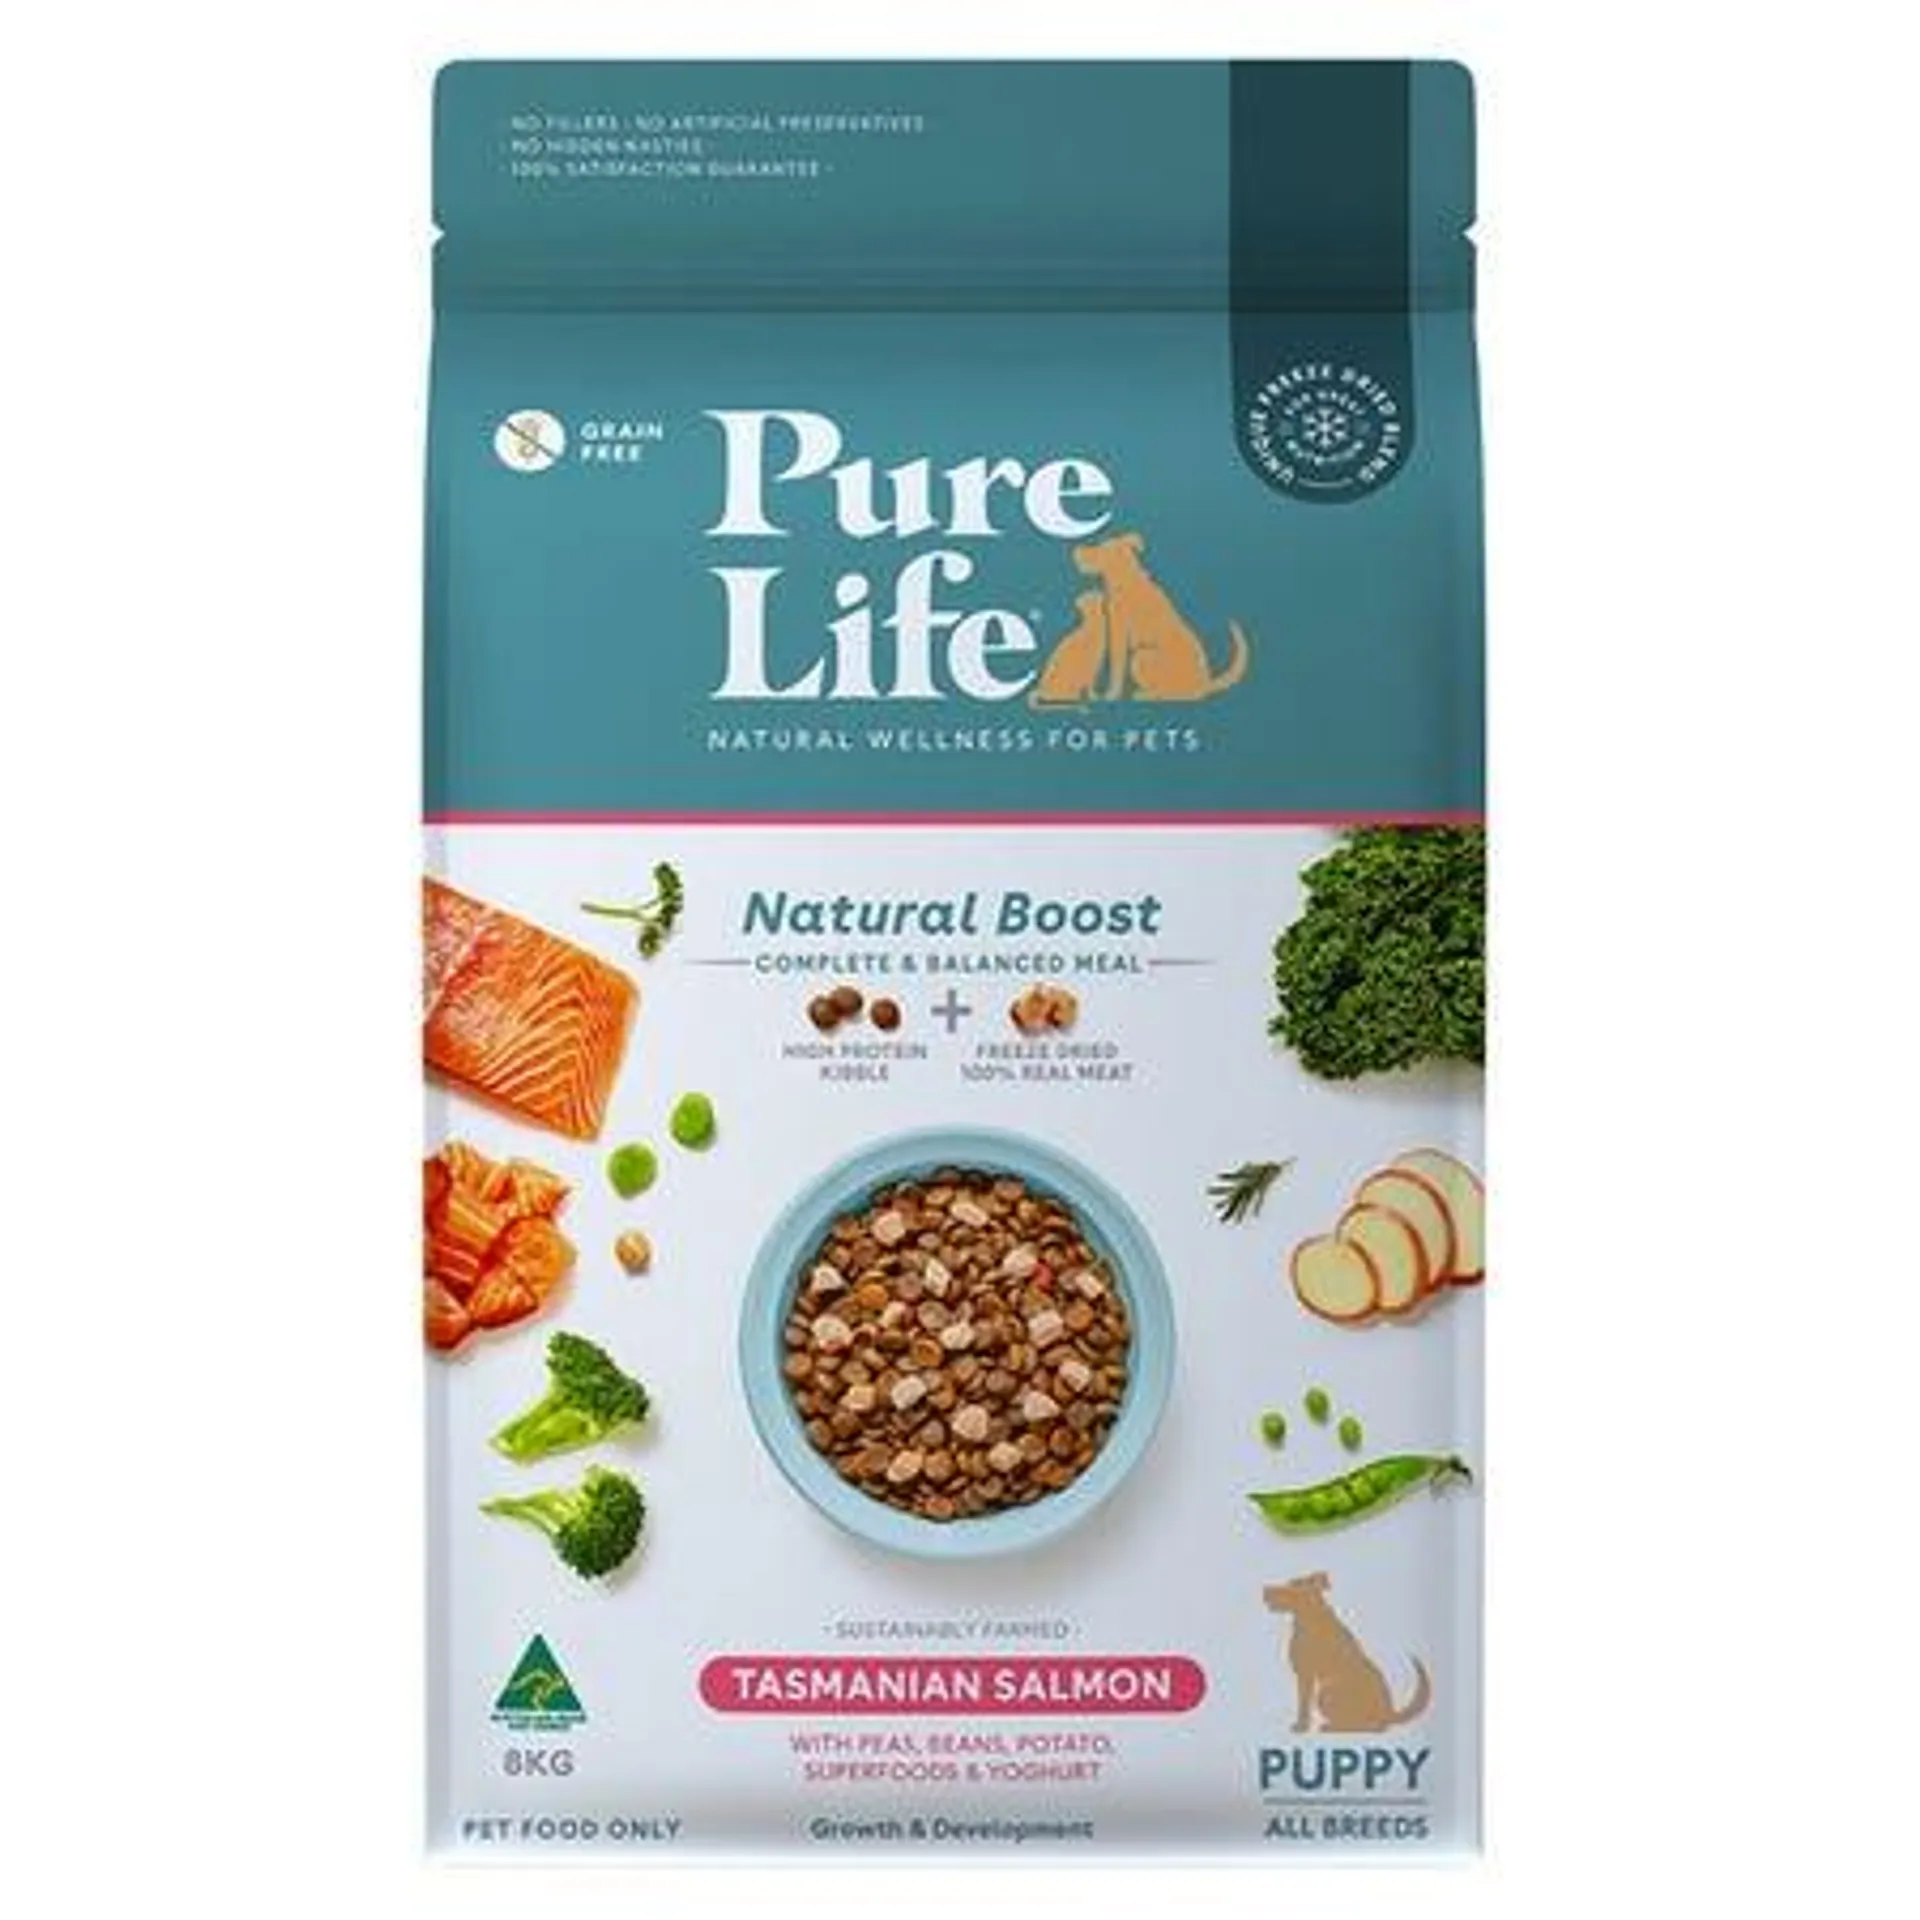 Pure Life Natural Boost Salmon Puppy Food